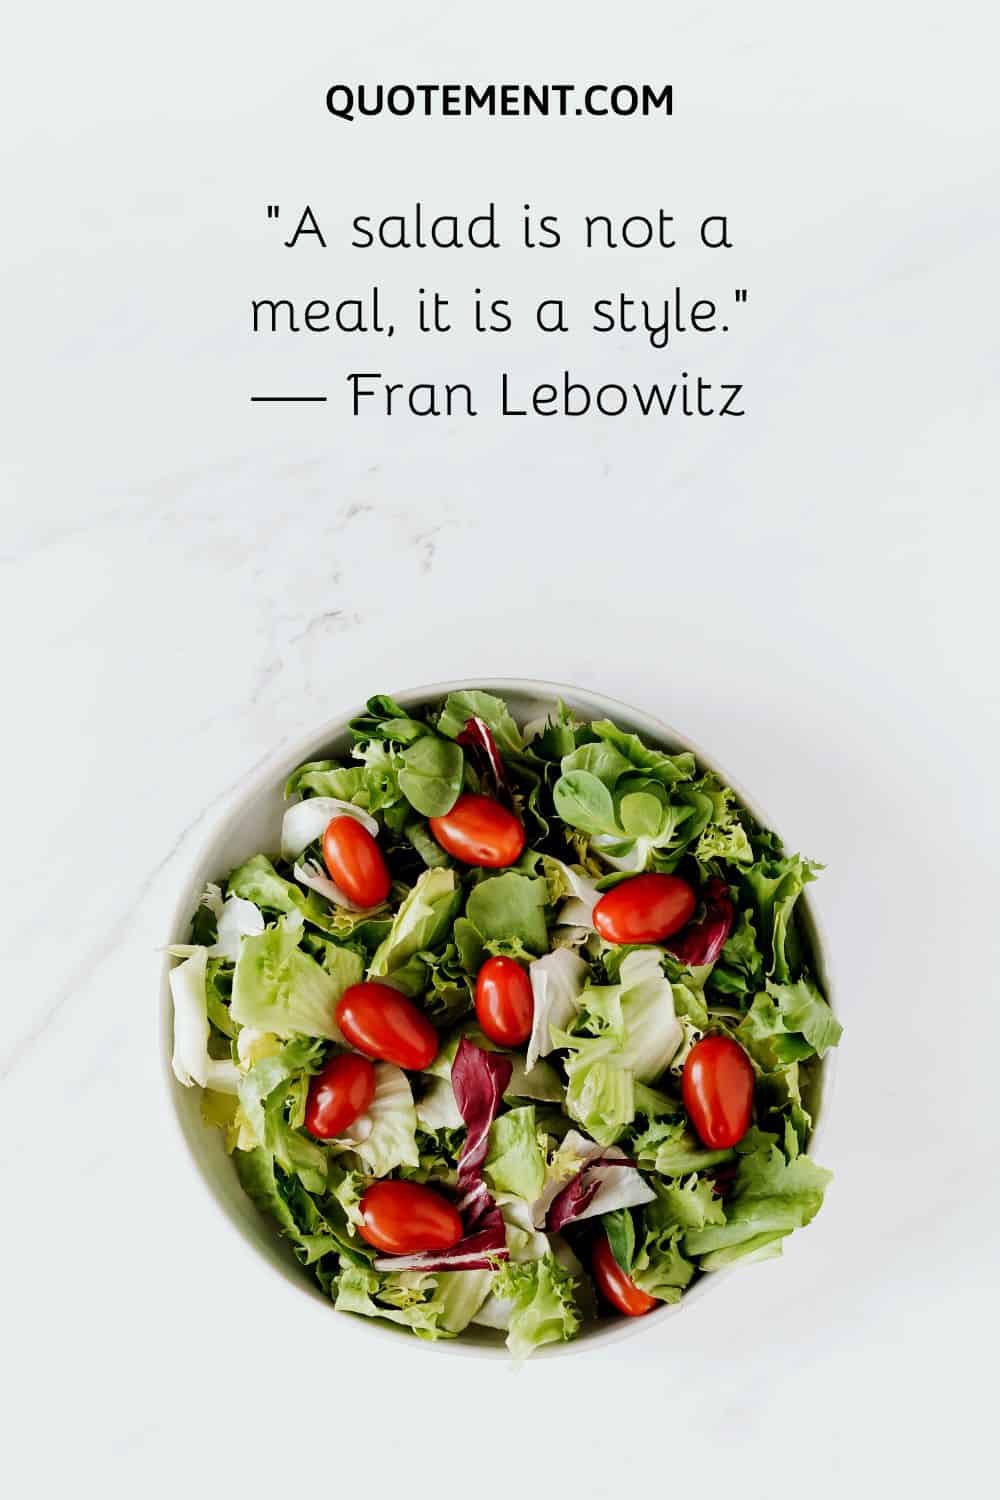 A salad is not a meal, it is a style